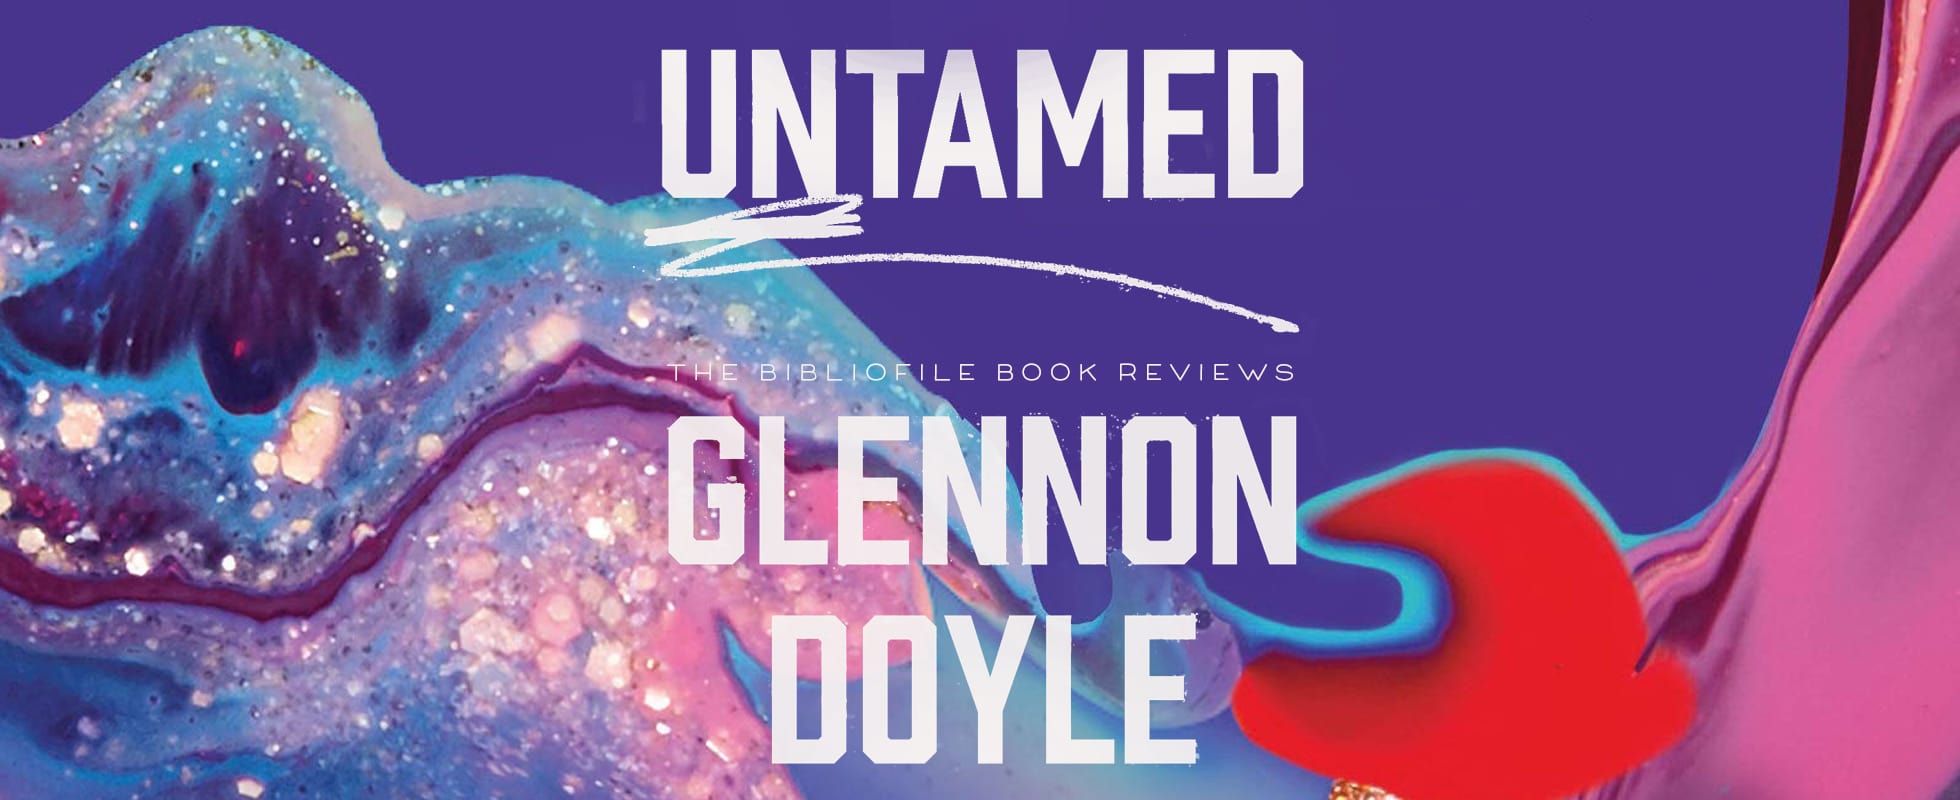 untamed glennon doyle book review summary synopsis chapter summary